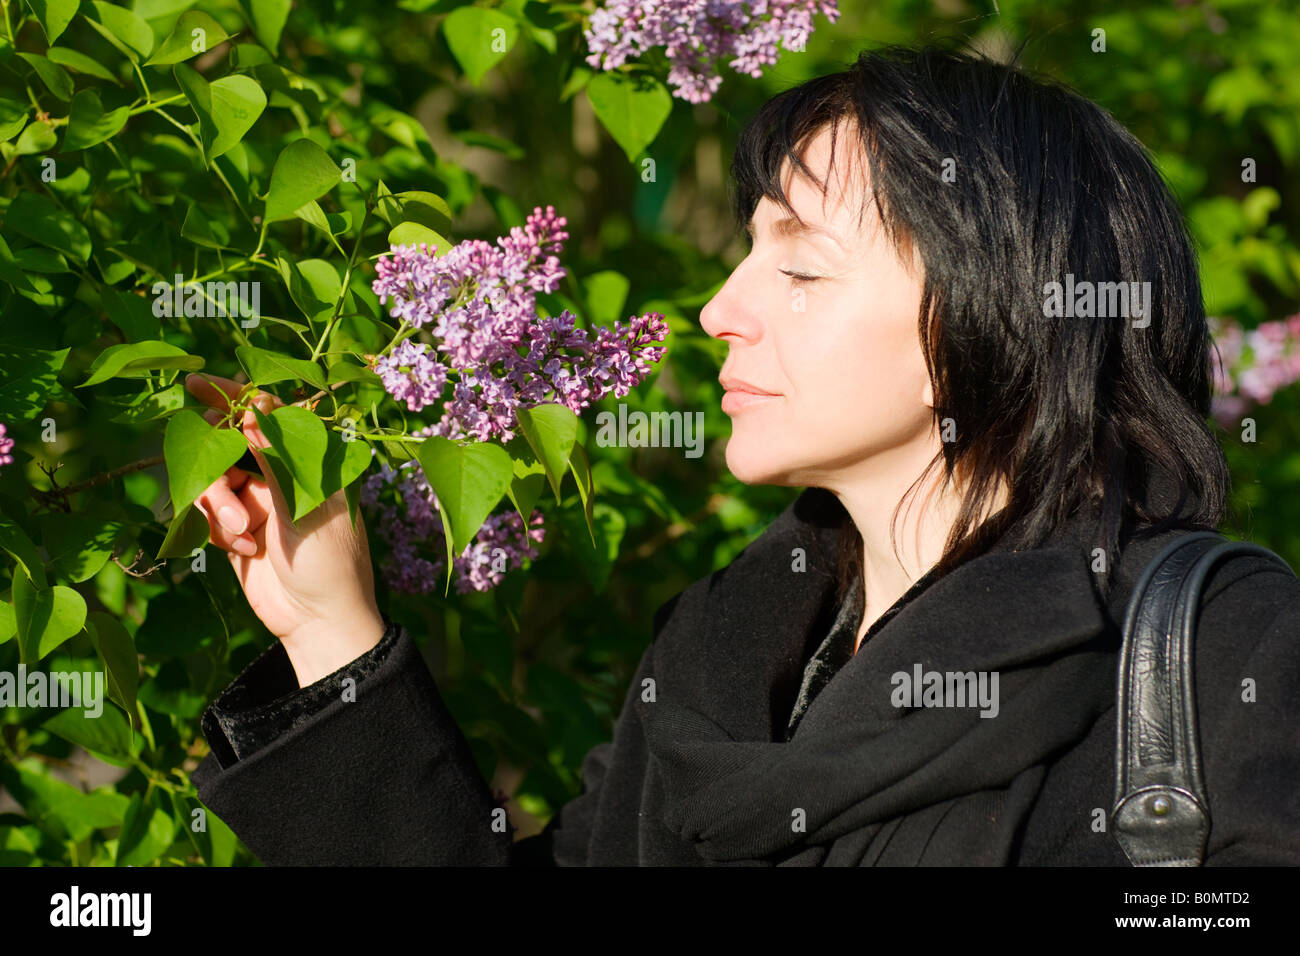 Middle aged woman smelling Flowers in the park garden Banque D'Images